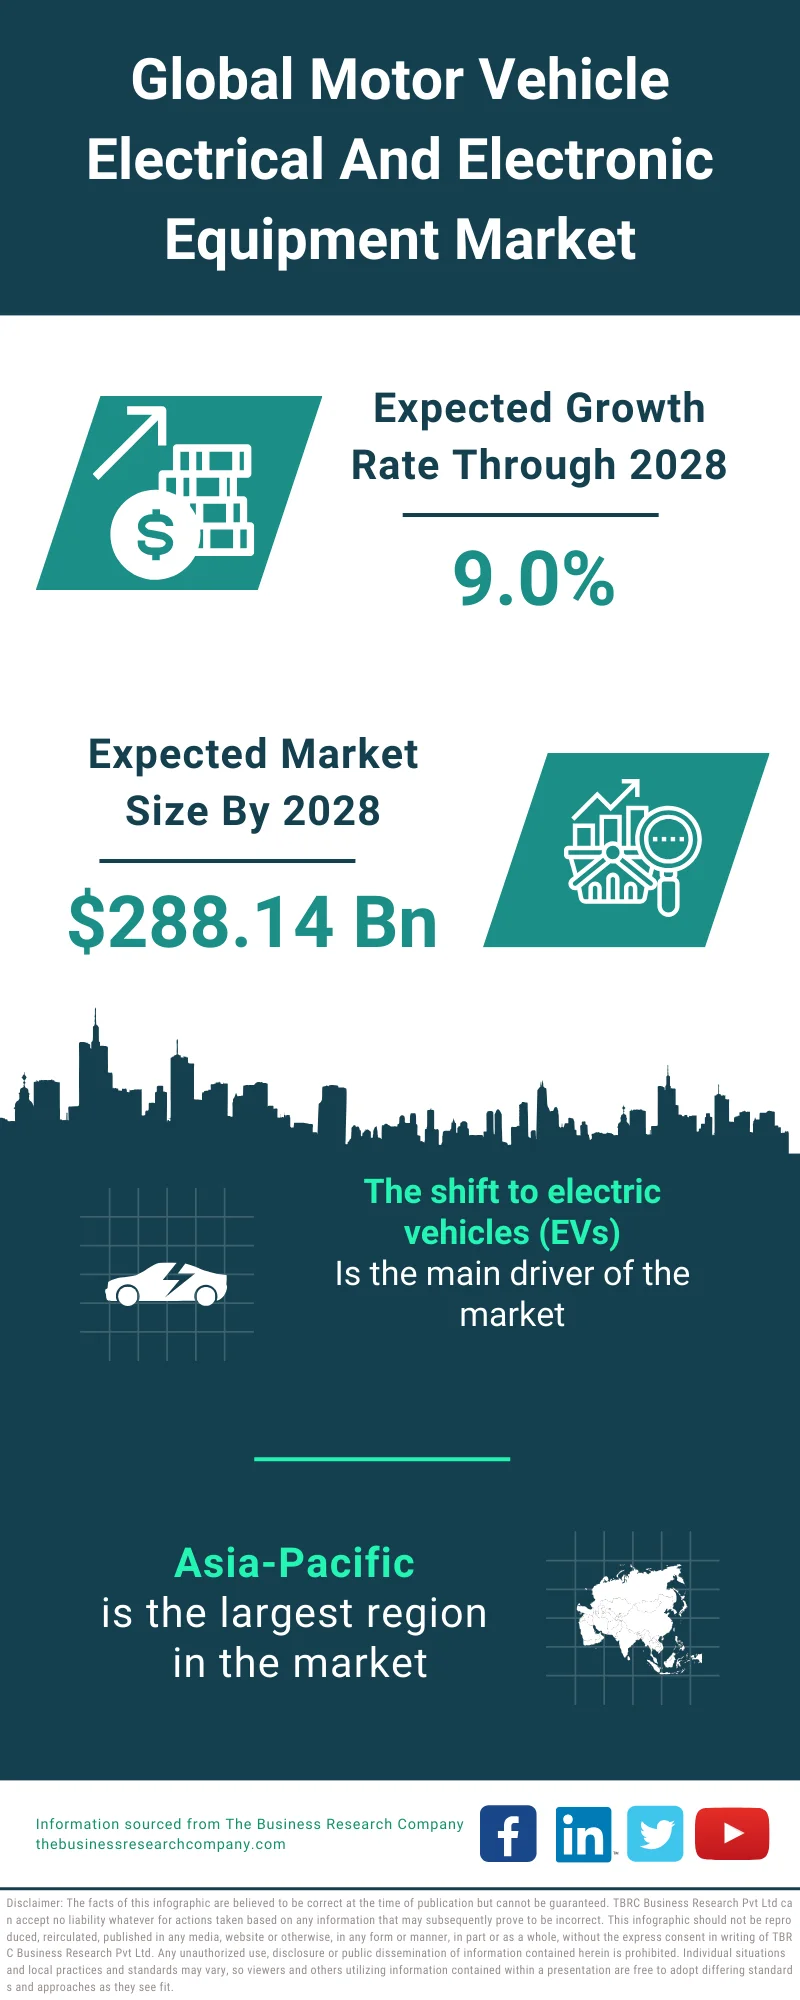 Motor Vehicle Electrical and Electronic Equipment Market